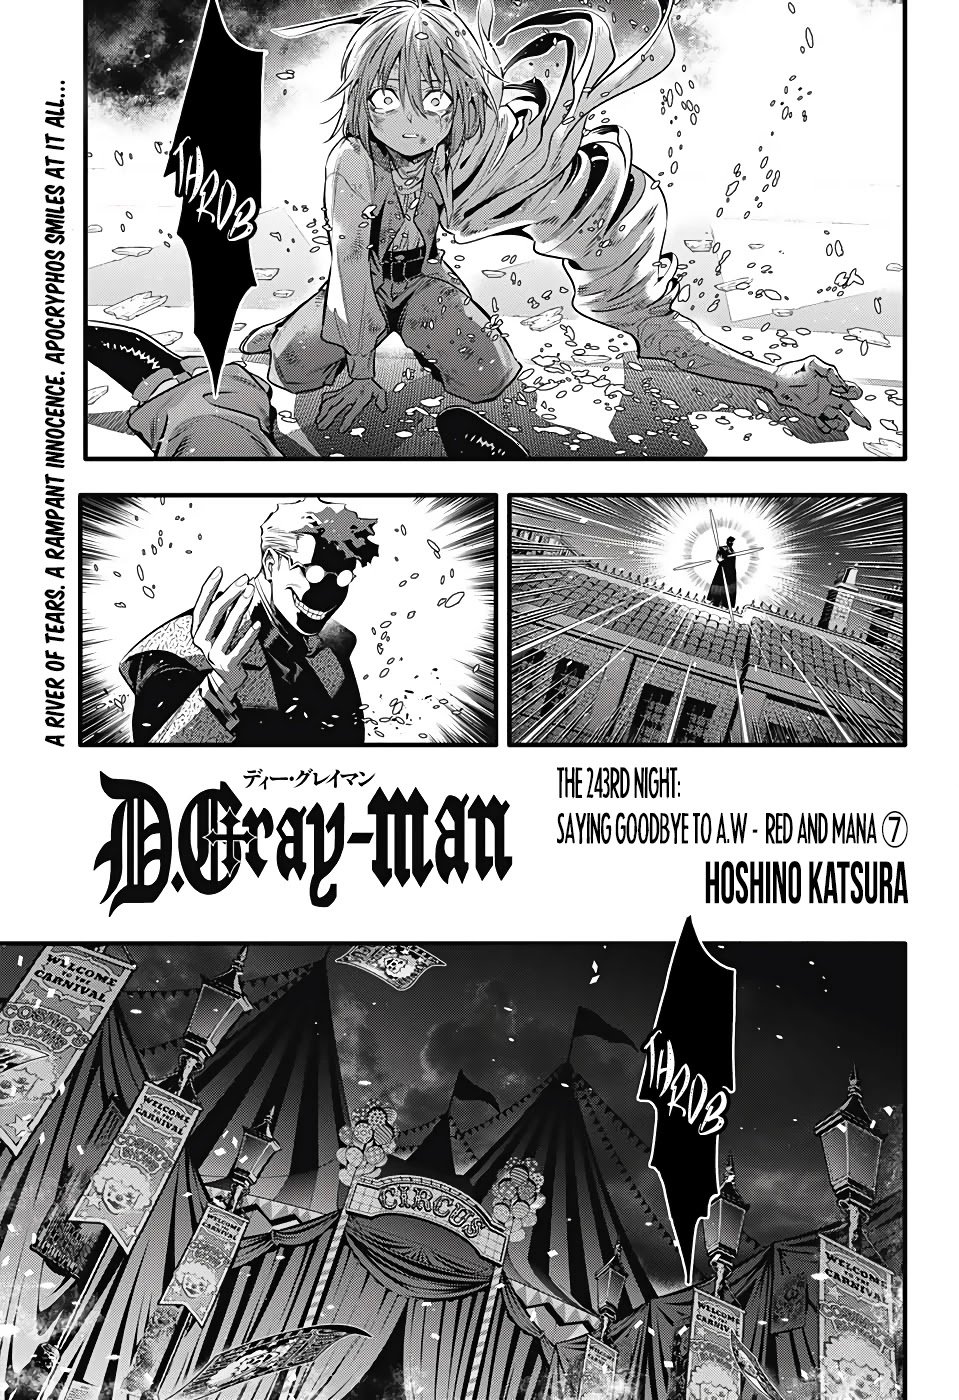 D.Gray-man chapter 243 page 6